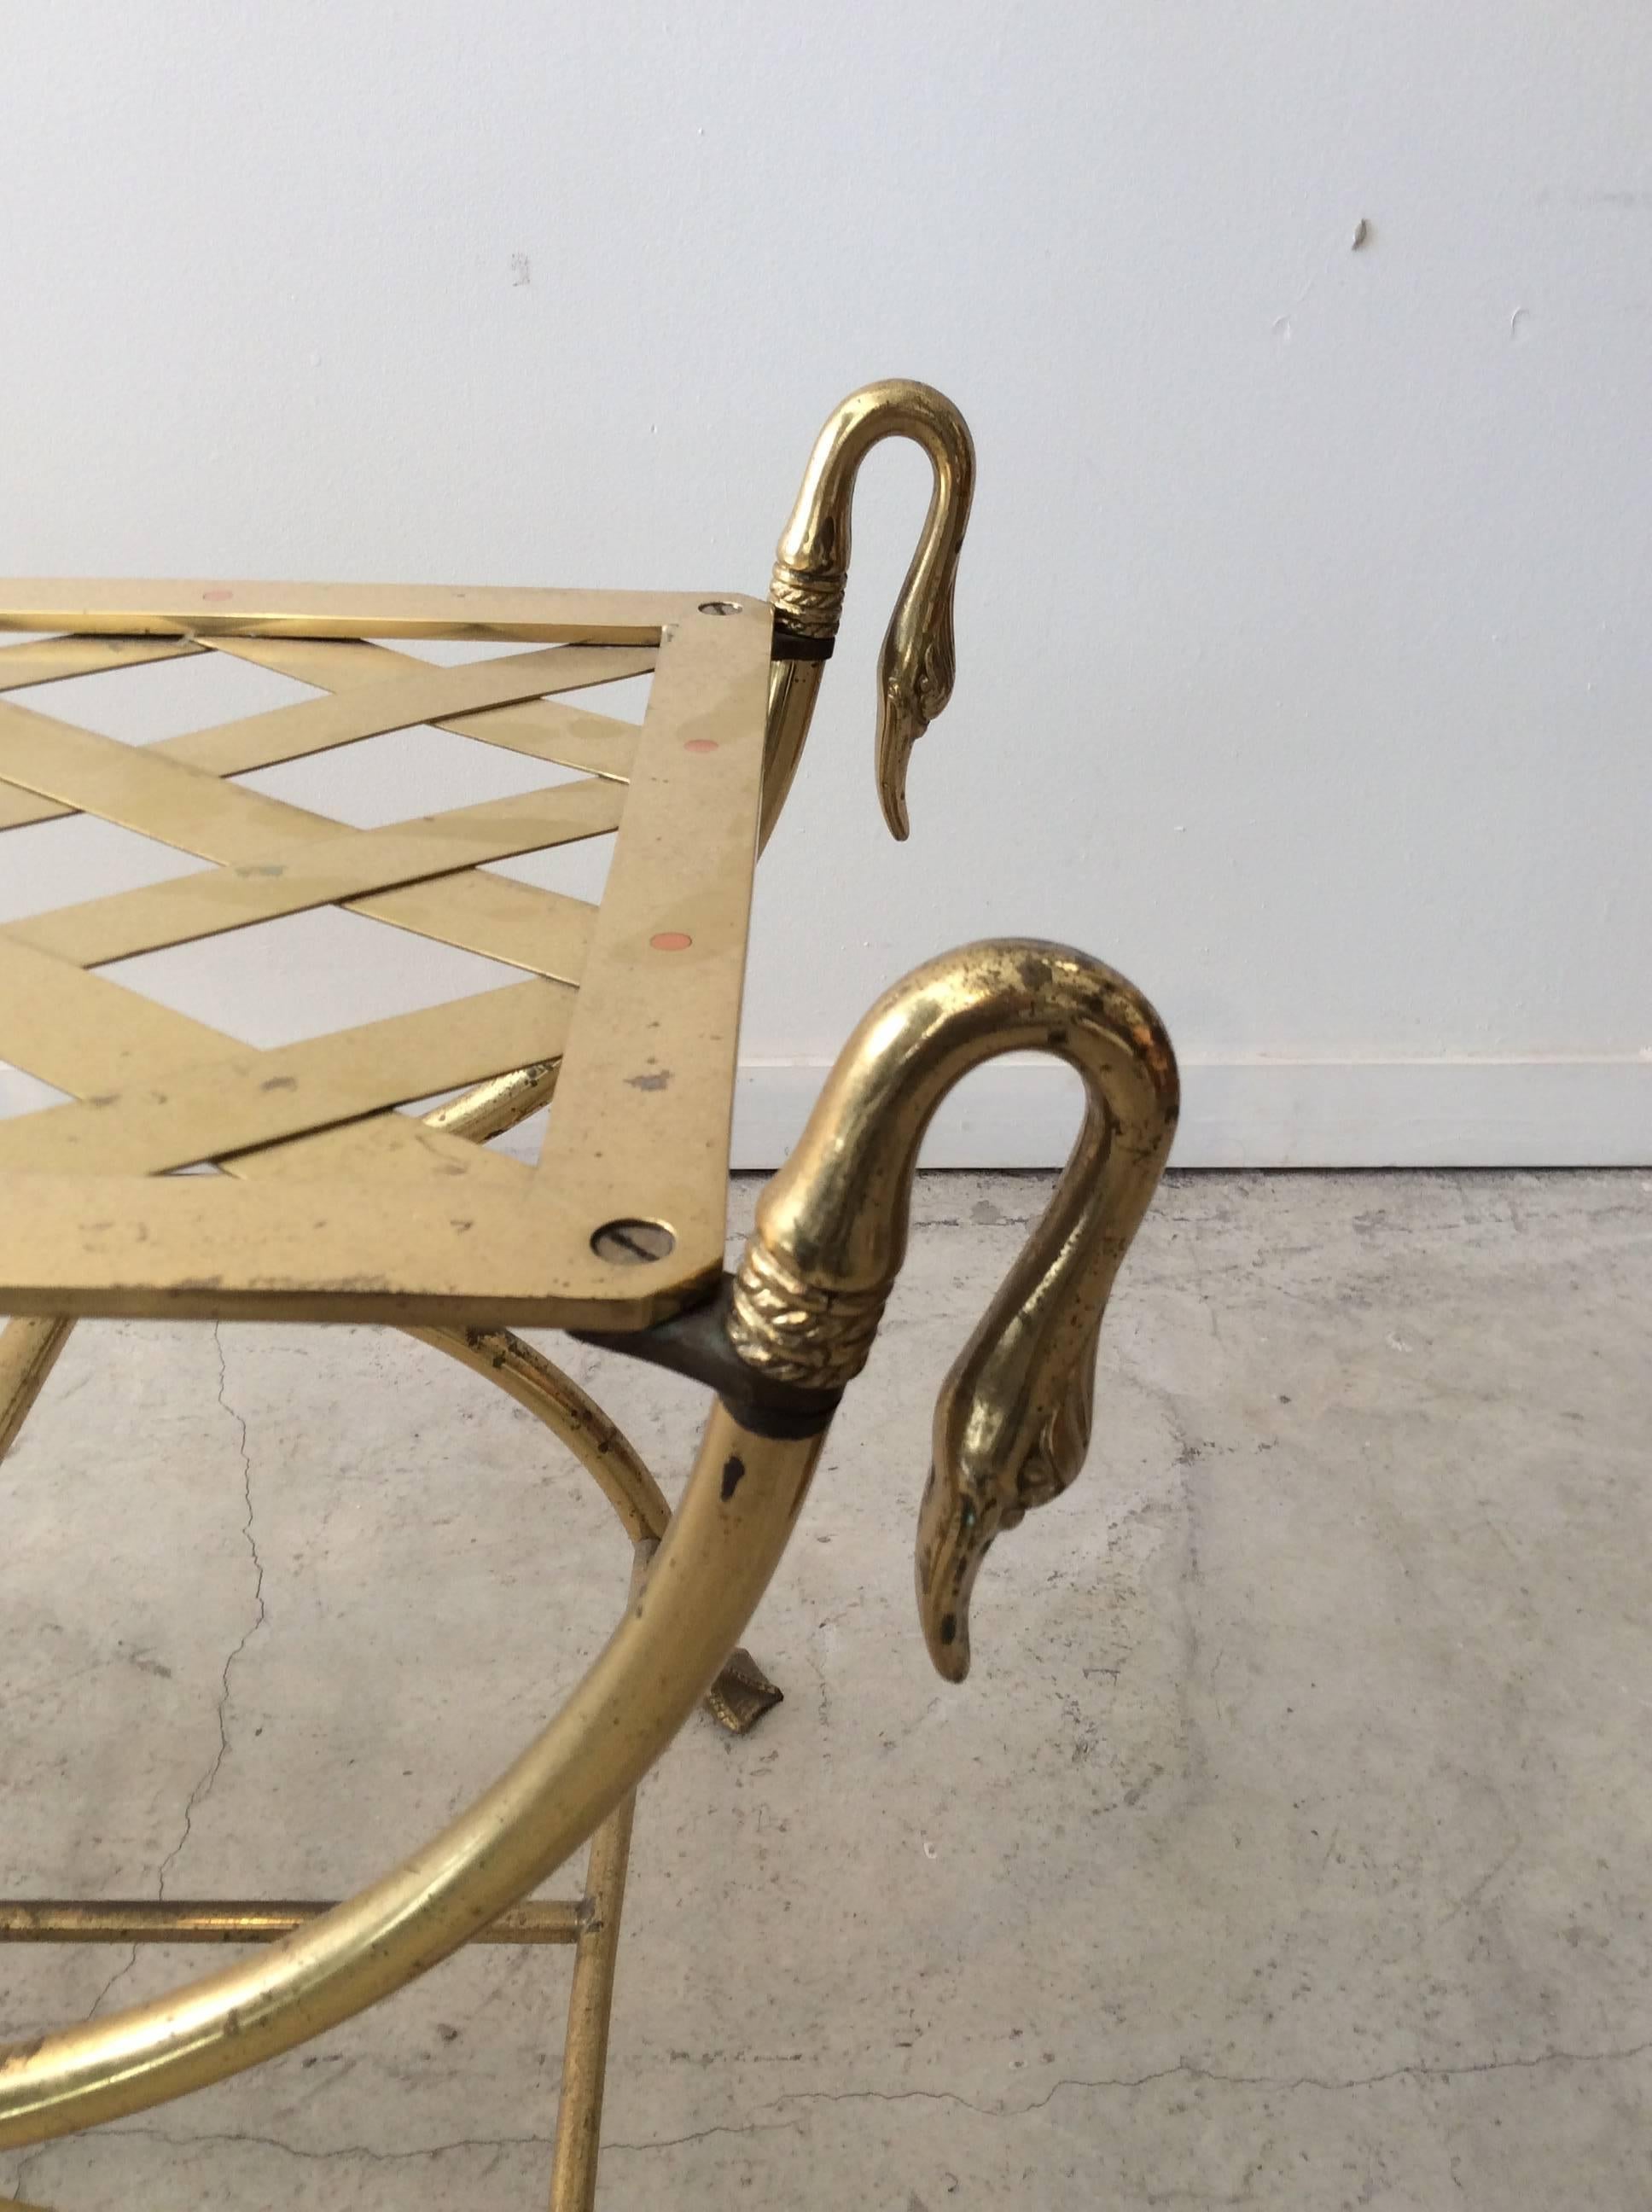 You are looking at a very high quality Italian brass bench with swan detailing on the armrest and on the feet. I've seen this bench as Maison Jansen but I don't know. This bench is all brass with very high detailing to the swan parts. This piece